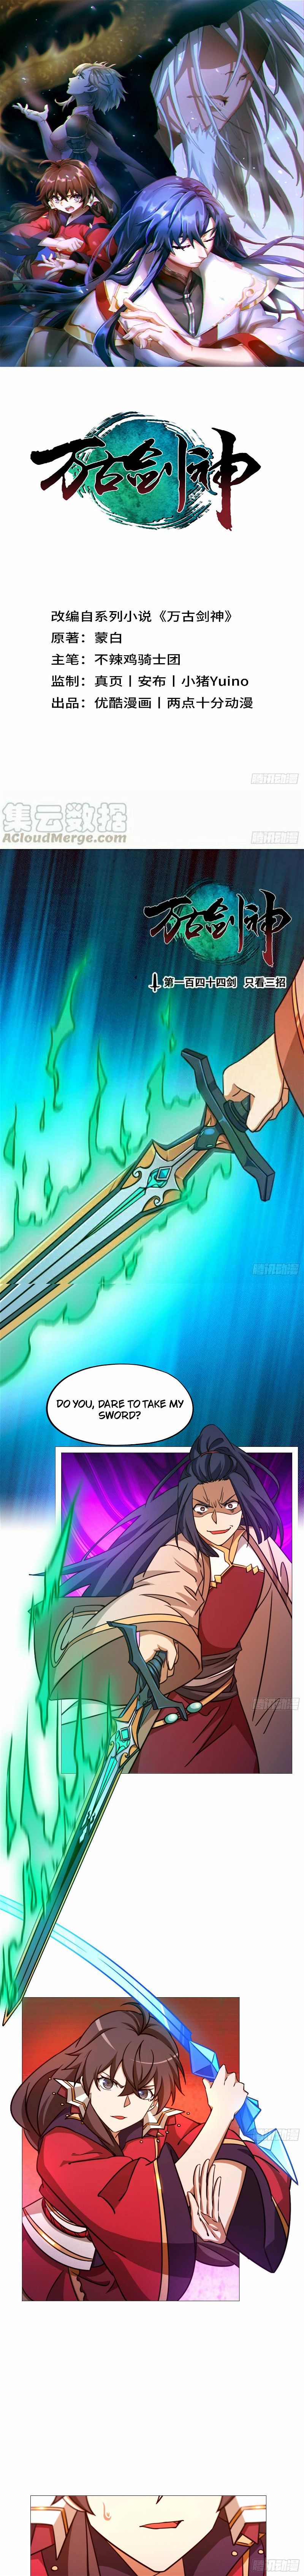 Everlasting God of Sword Chapter 144 page 1